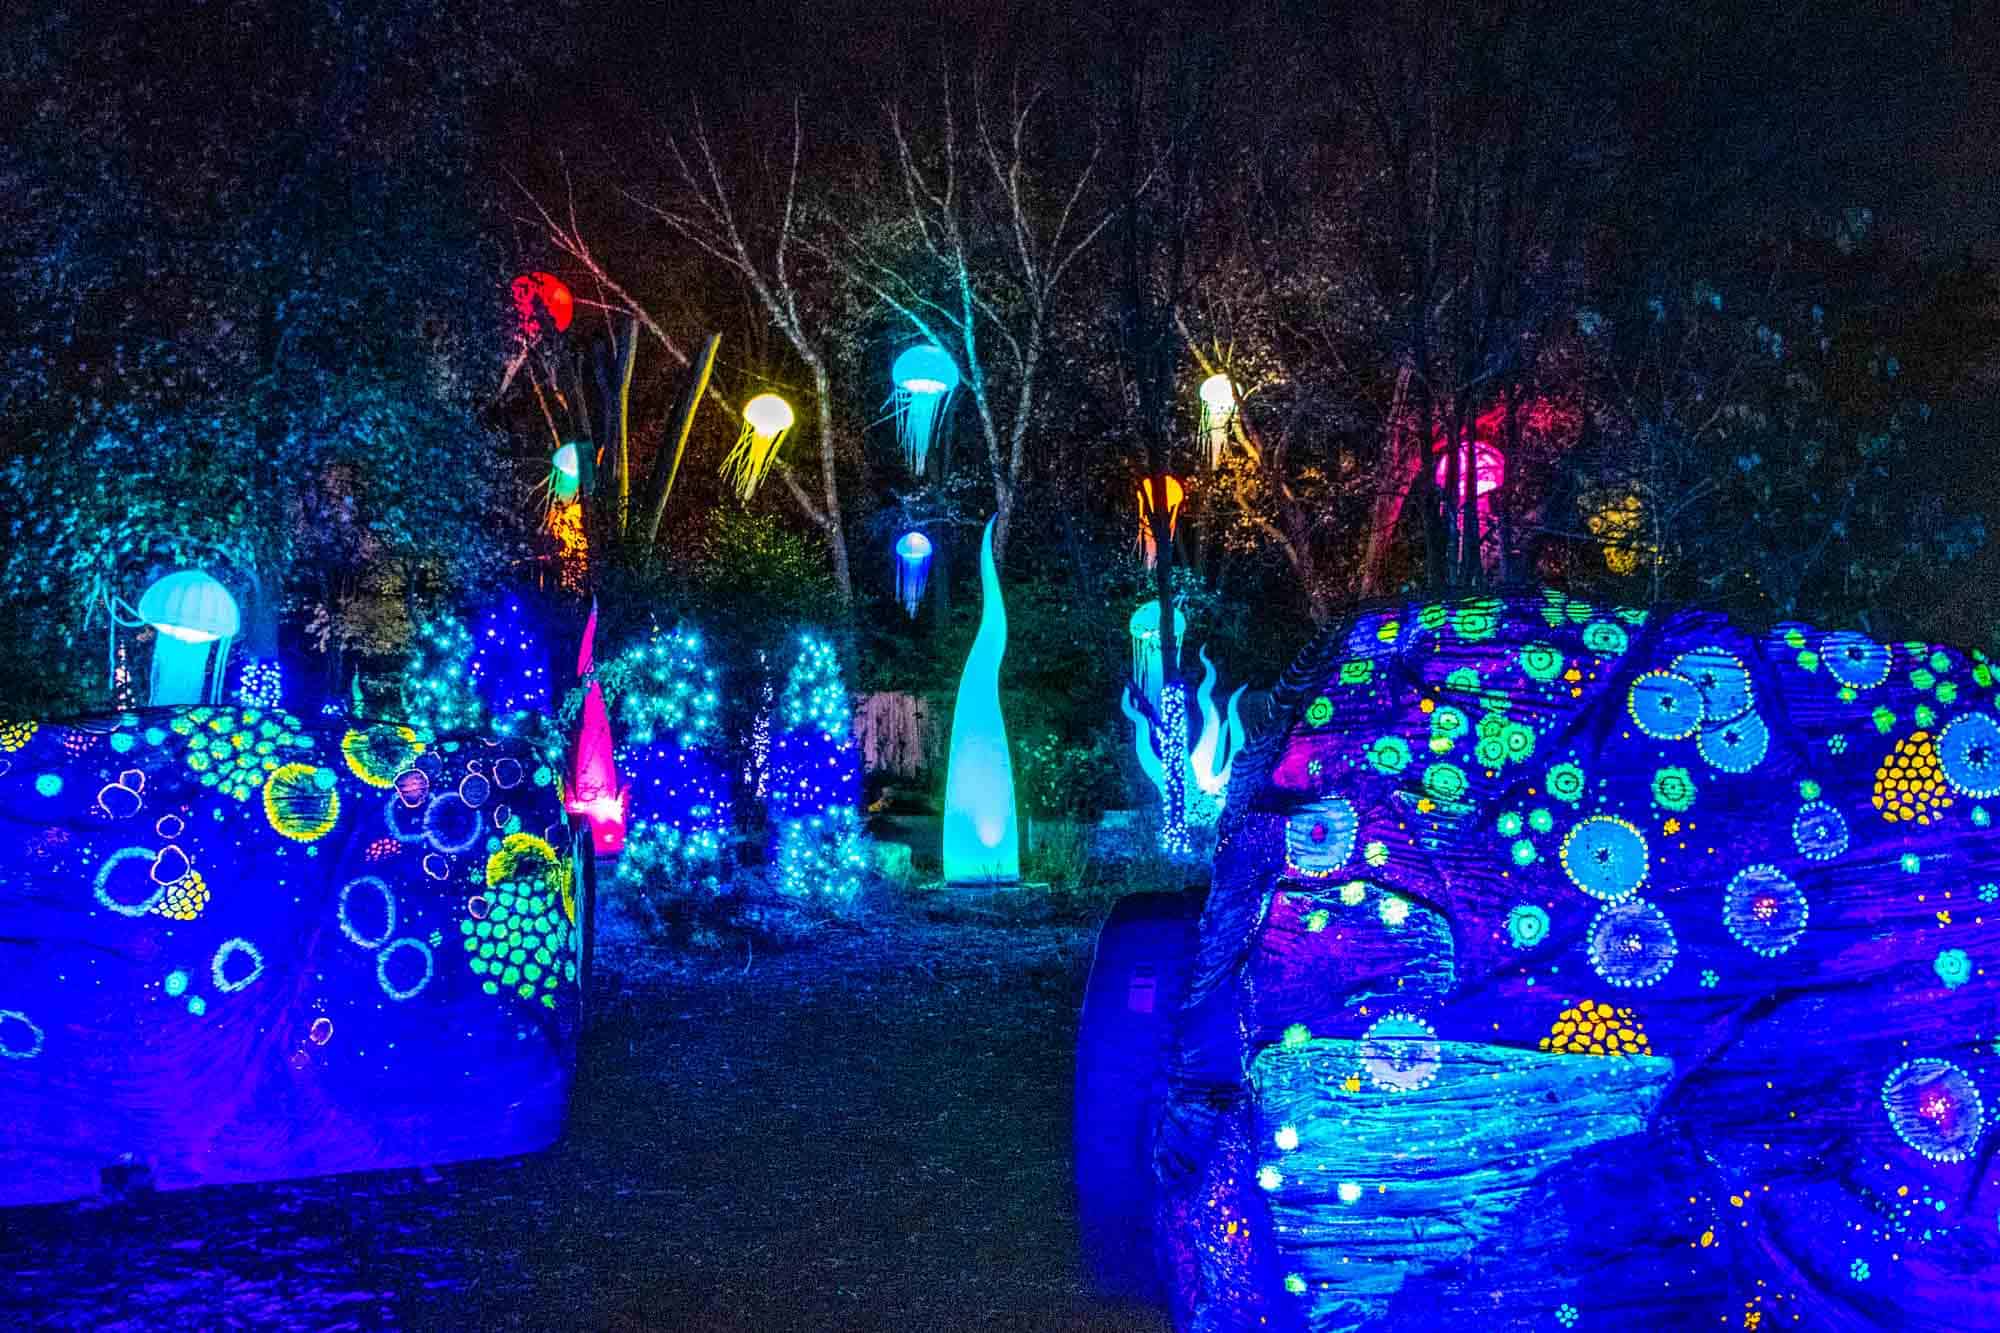 Rocks with brightly colored designs illuminated by blacklight beside lit up giant jellyfish 